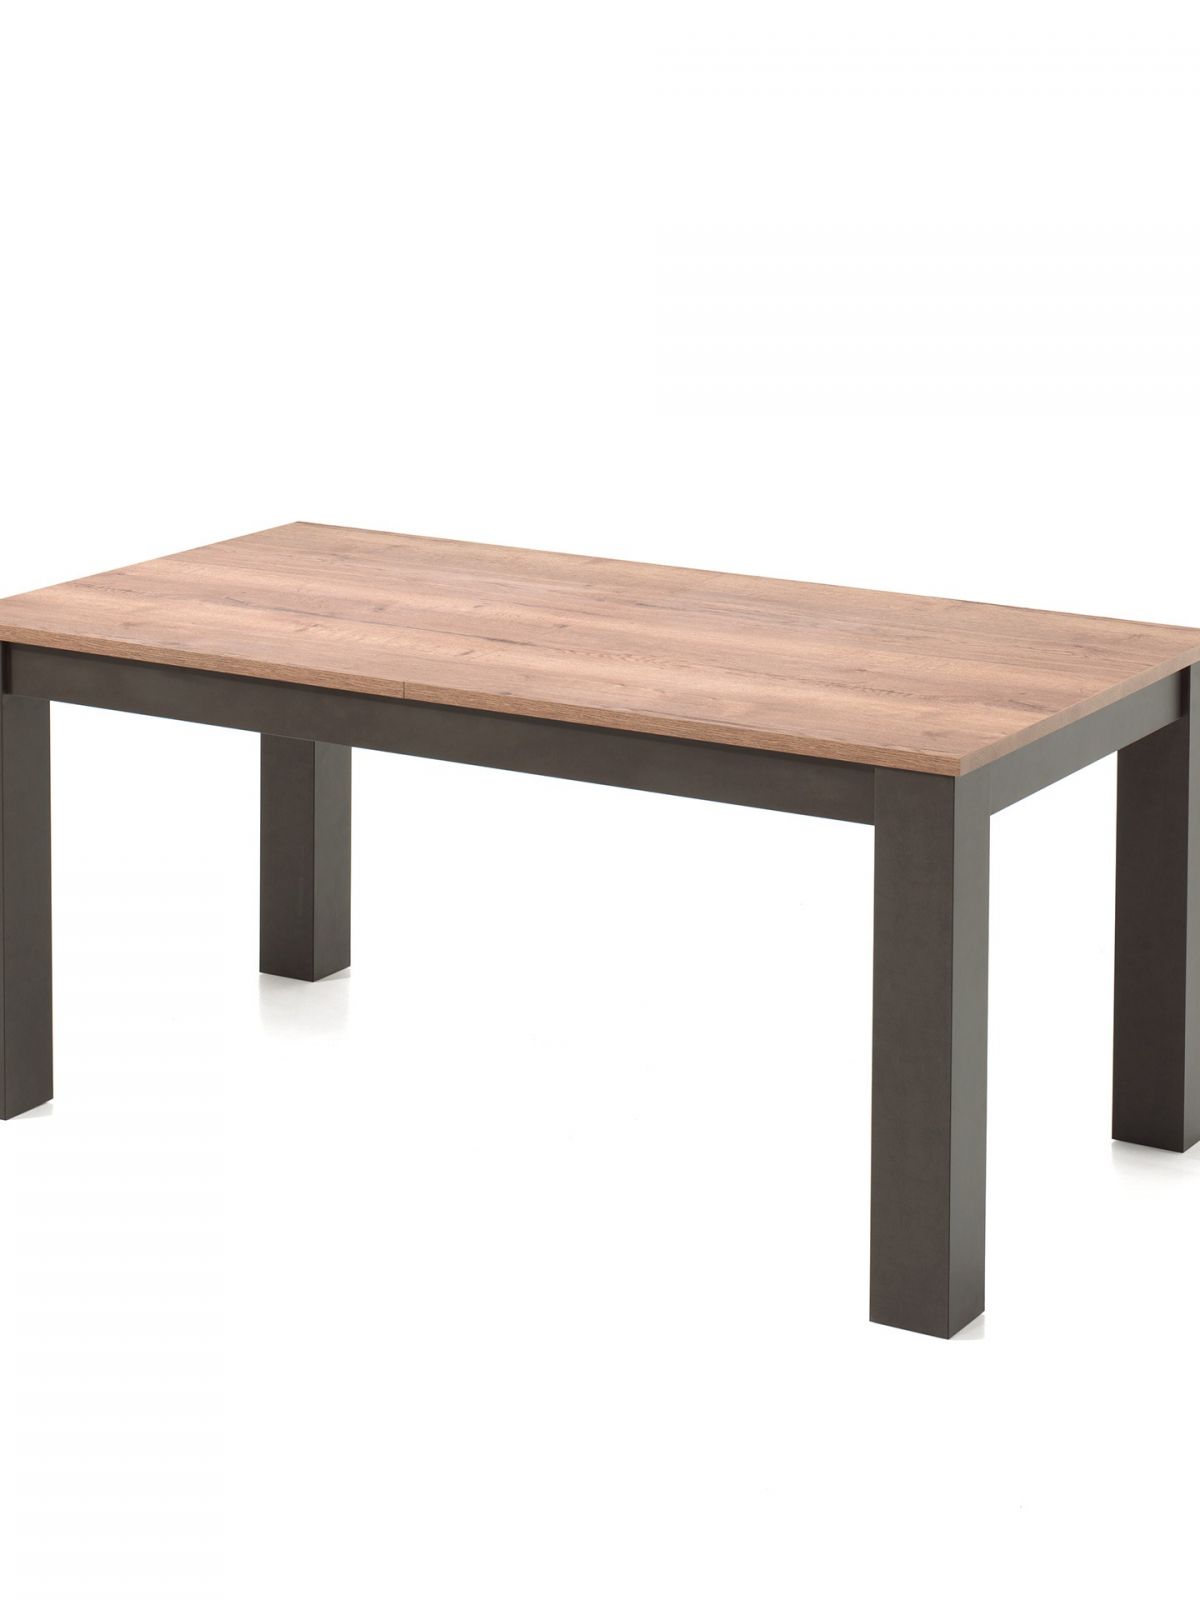 Table rectangulaire fixe 1,80m